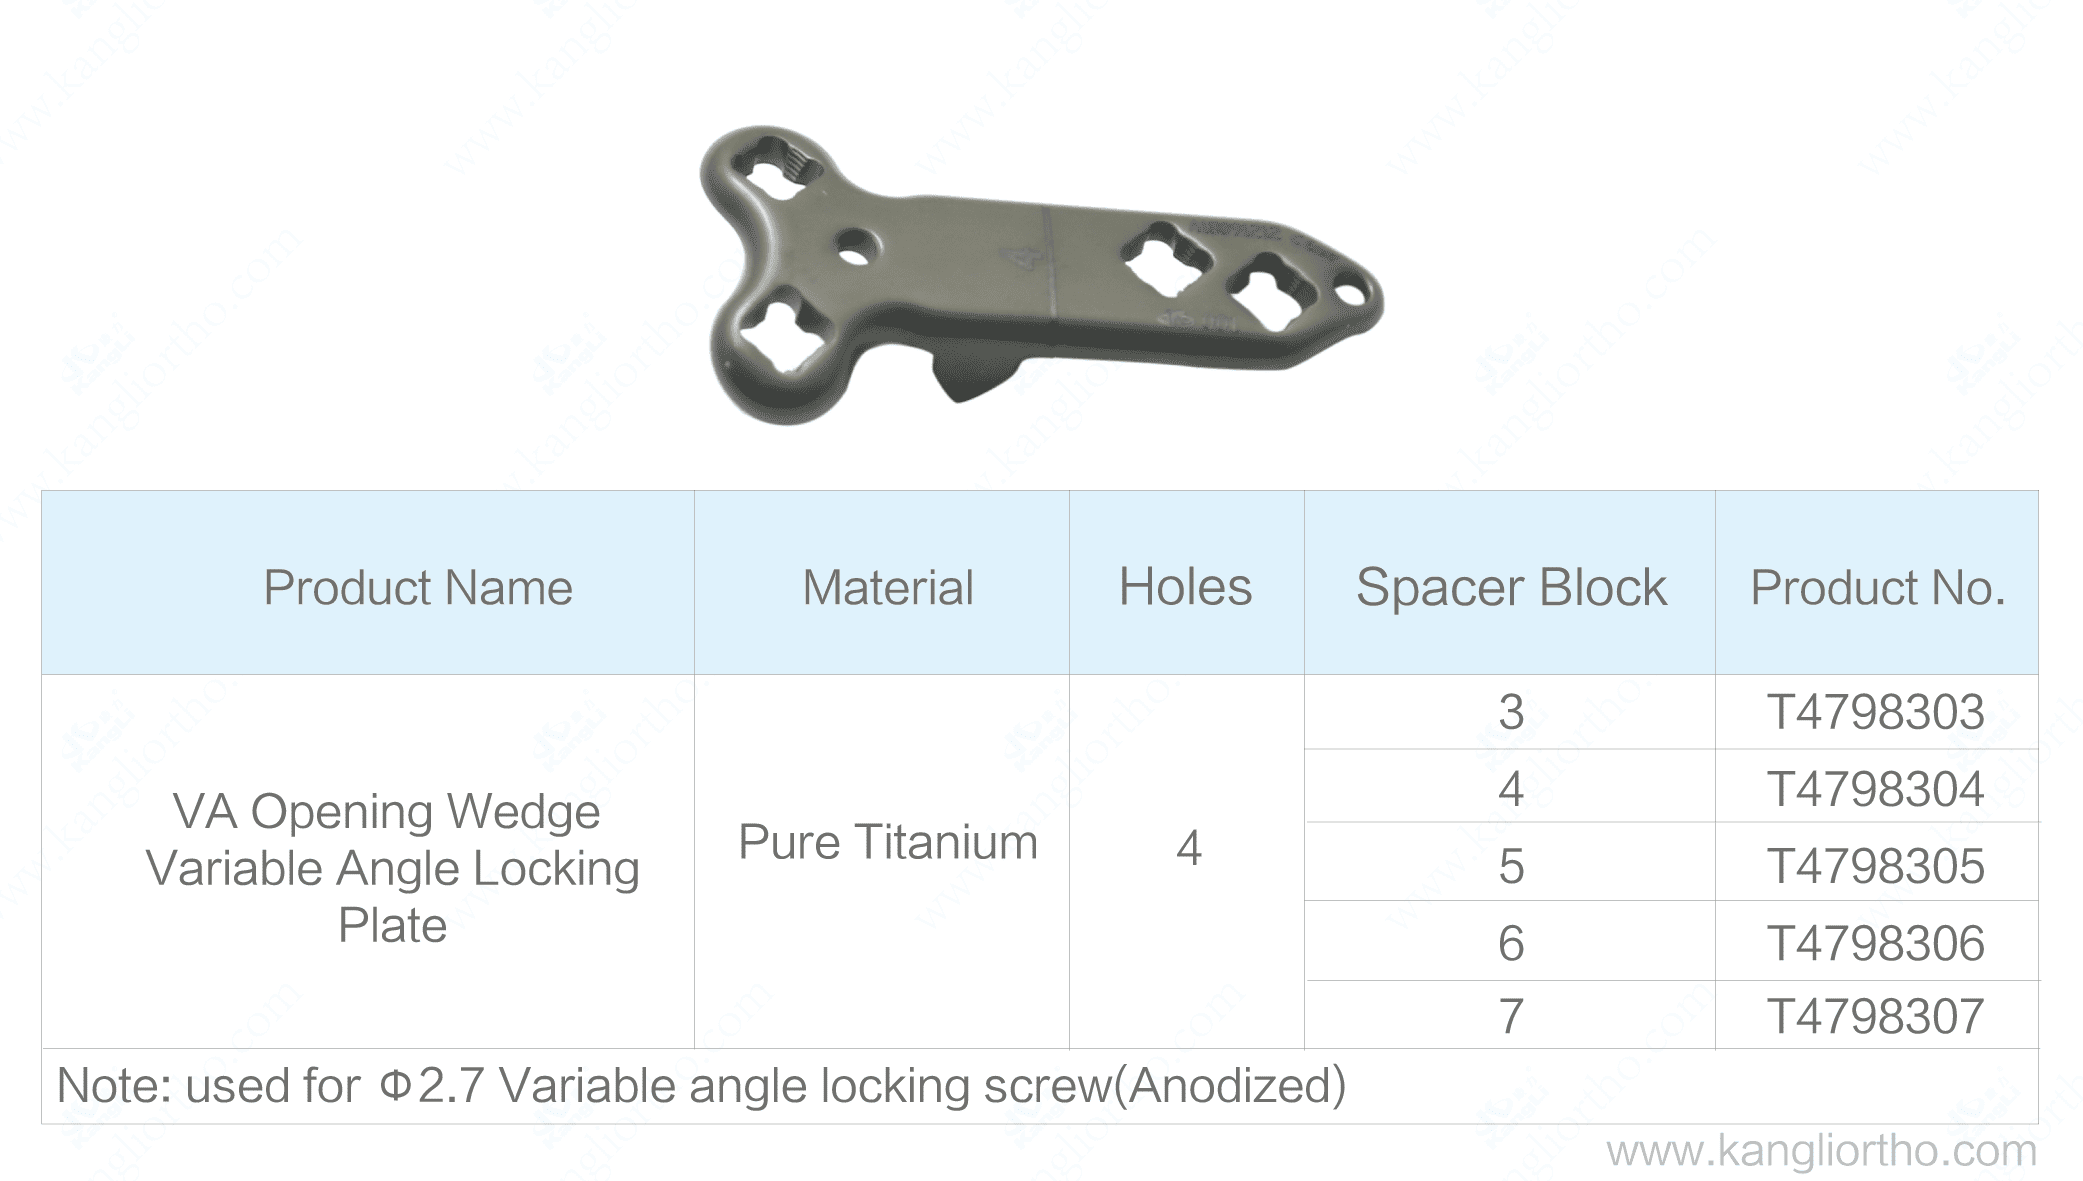 va-opening-wedge-variable-angle-locking-plate-specifications